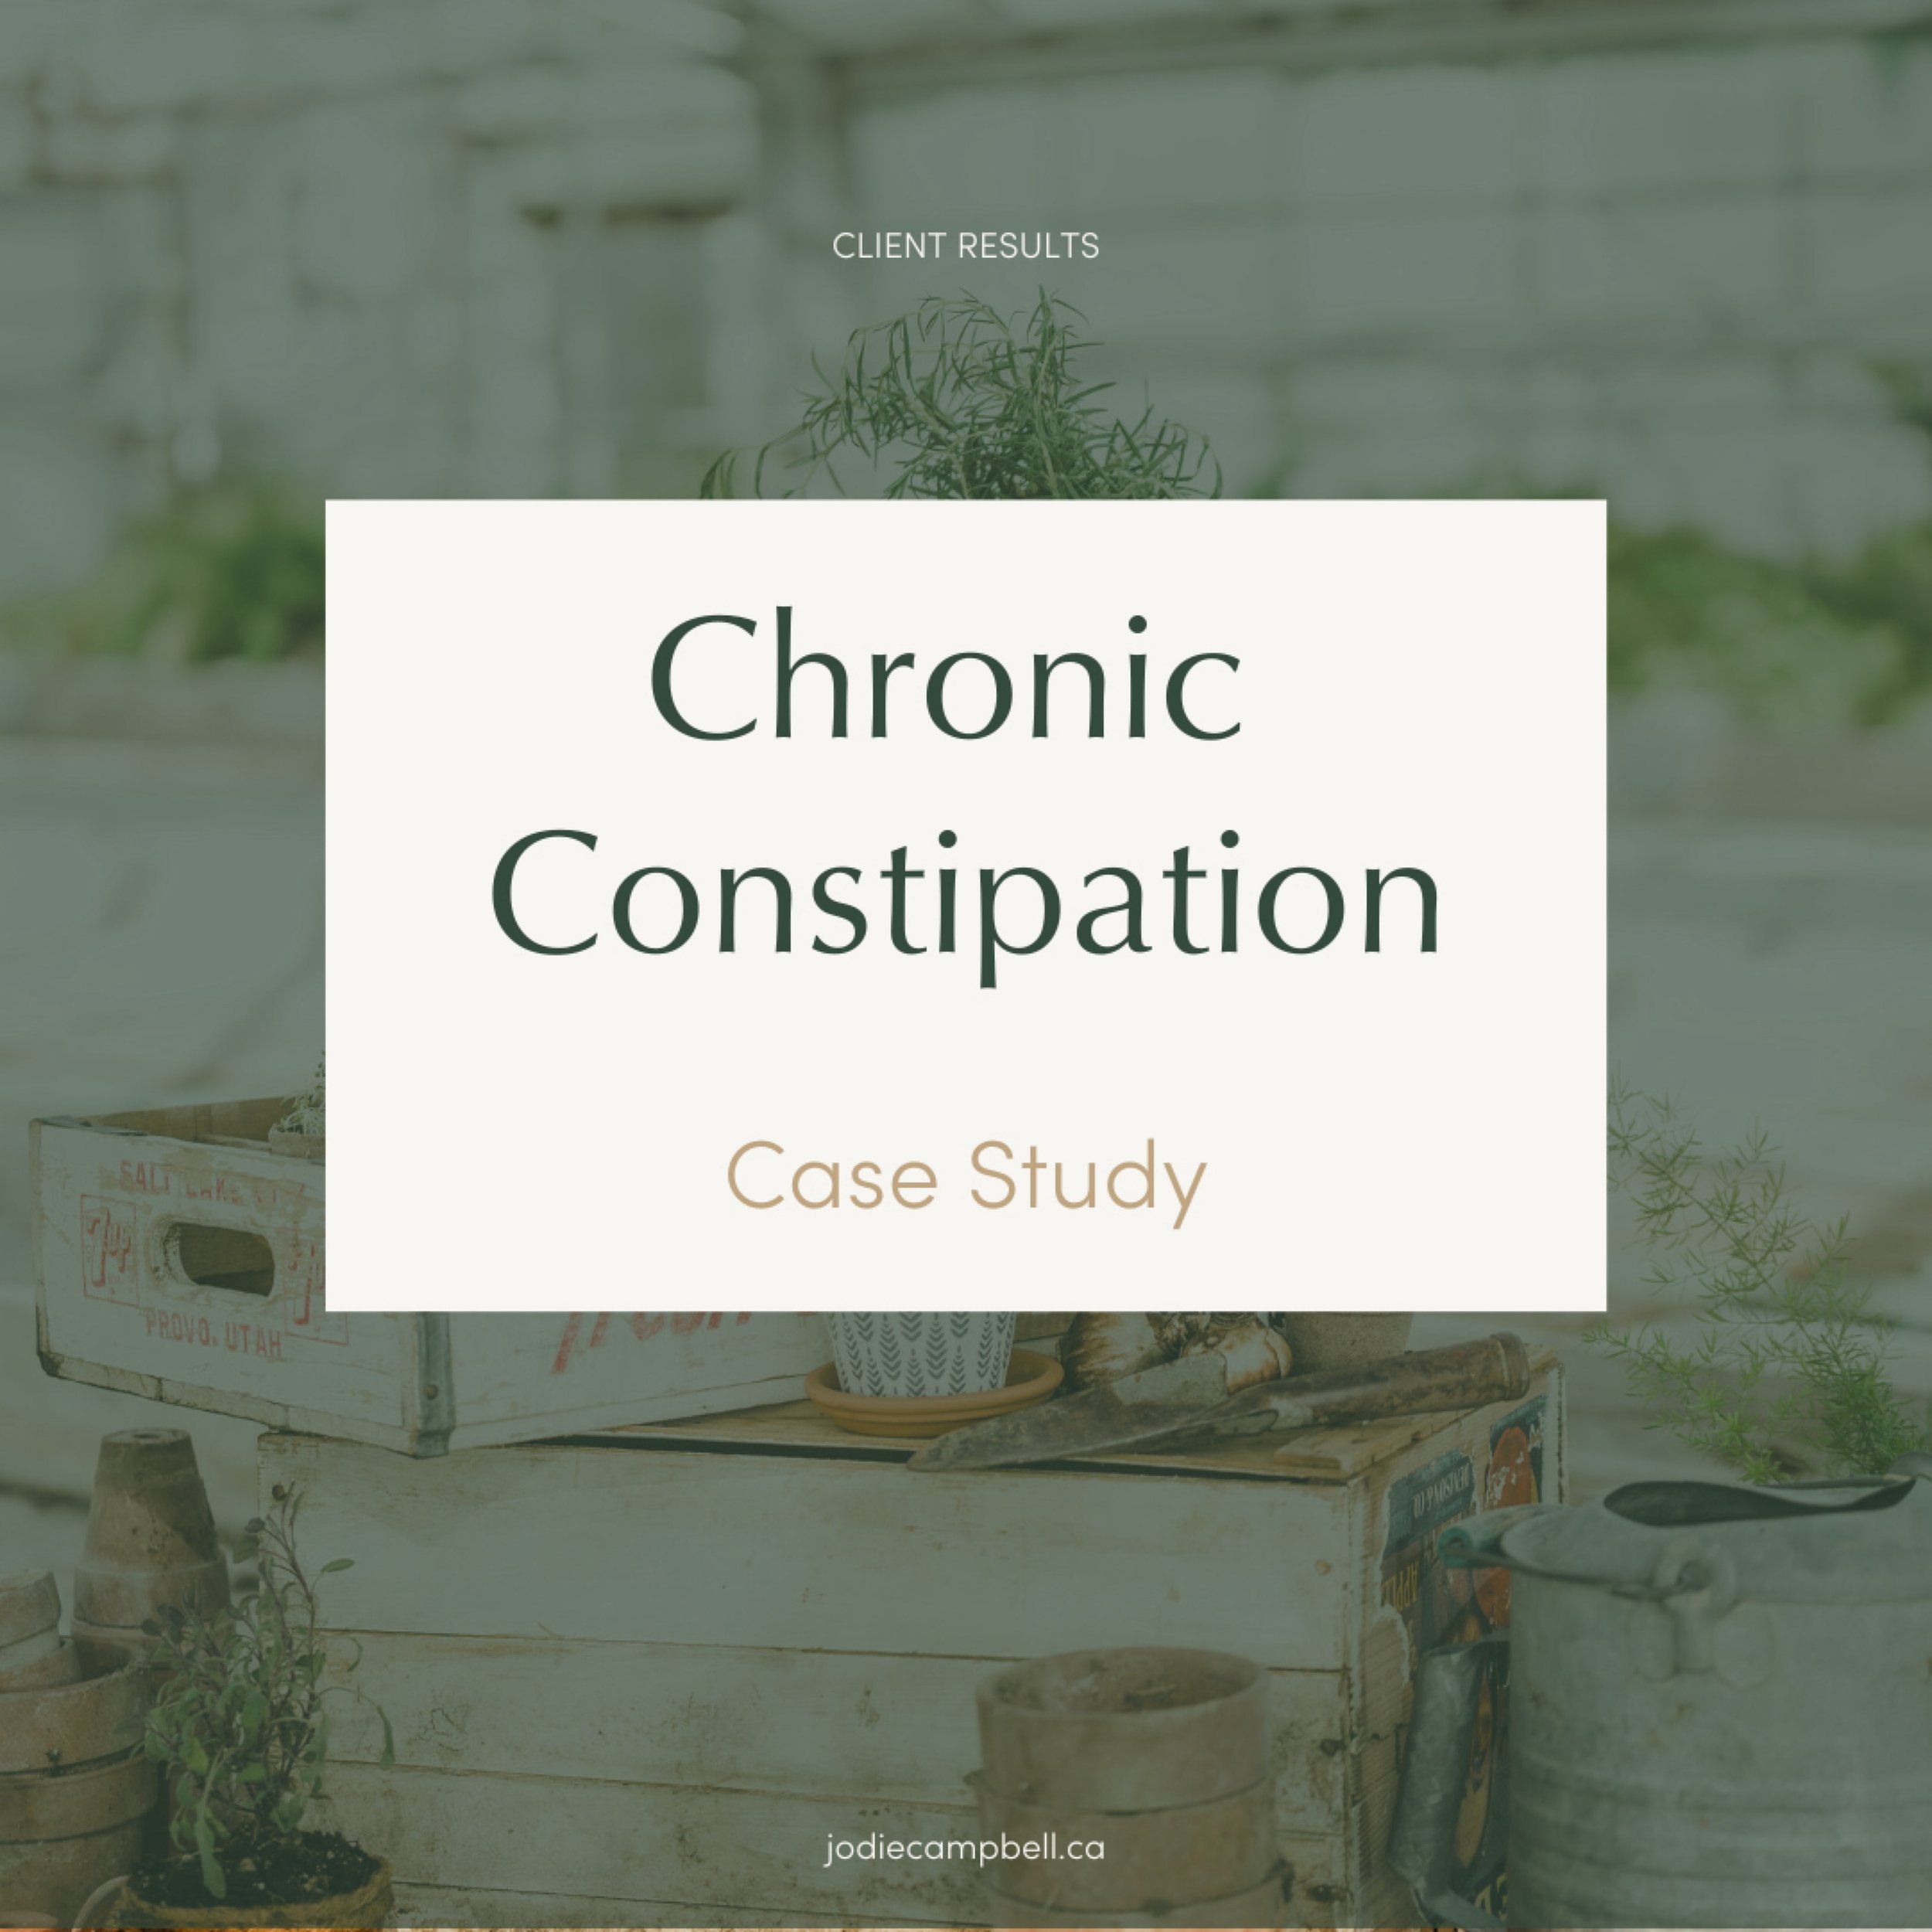 Overcoming Constipation: A Journey to Digestive Wellness!⁣💩

Shedding light on resolving constipation and the steps to a healthier gut. 

Meet Willow, who conquered constipation and found relief through lifestyle changes and a tailored approach.

Wi